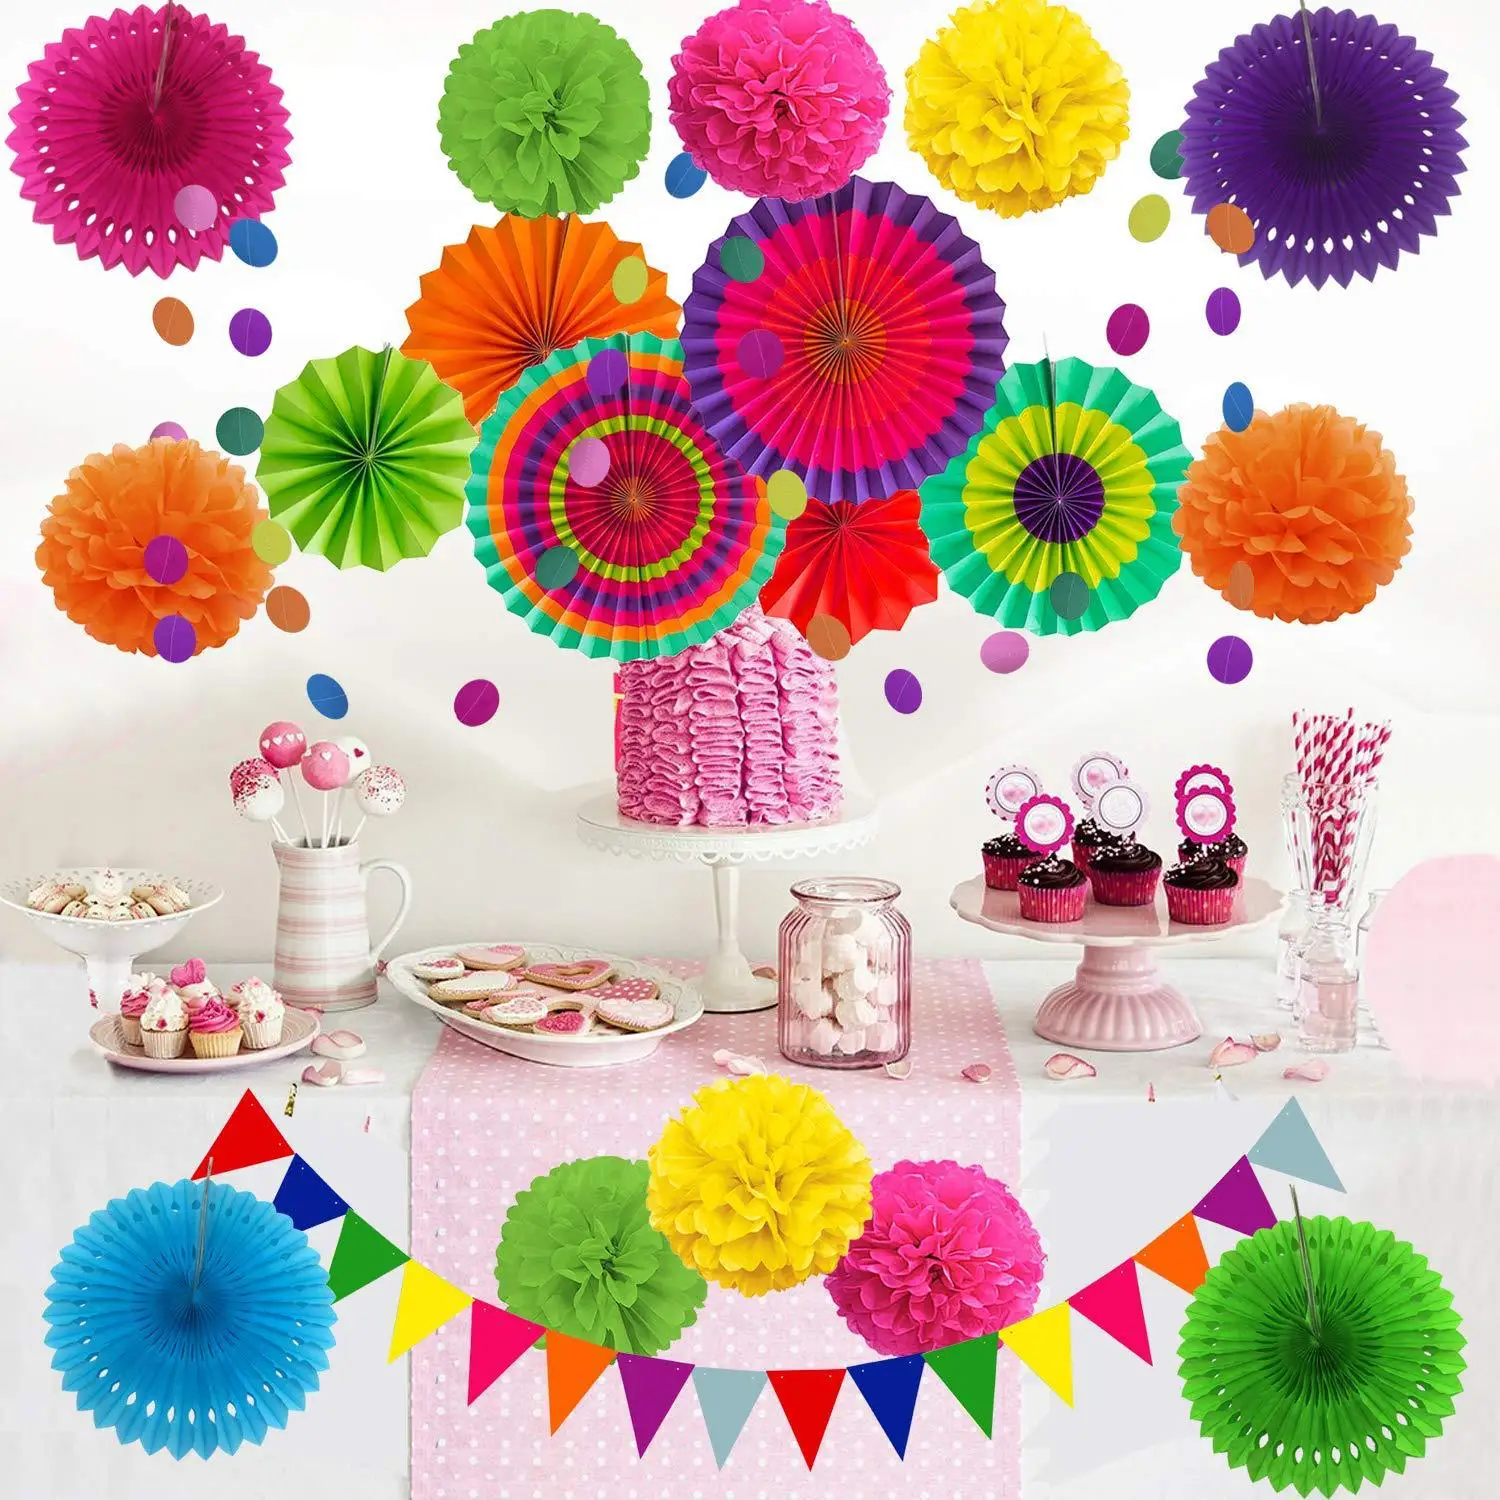 

20 Pcs Poms Flowers Hanging Paper Fans Pom Garlands Triangle Bunting Flags Birthday Party Decorations Wedding Baby Shower Girl